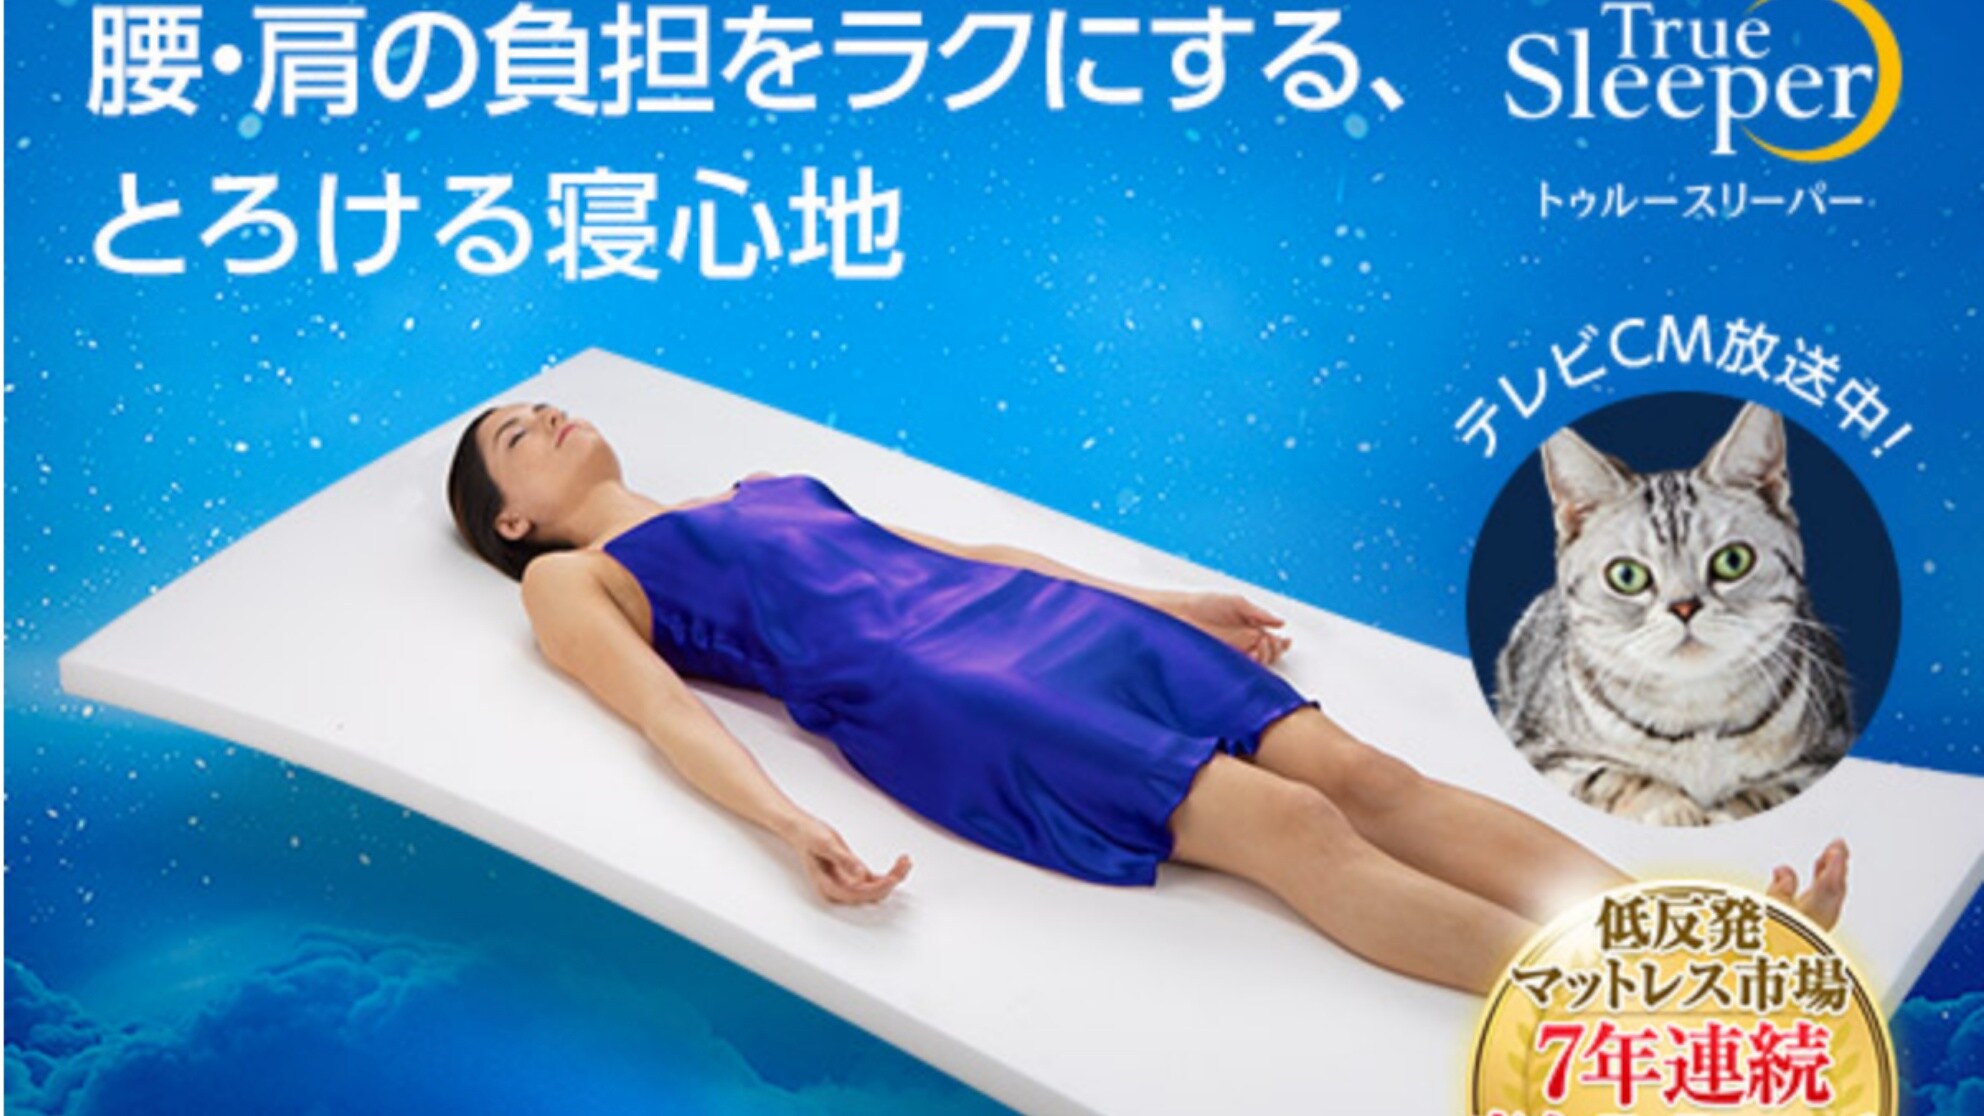 [Good sleep room] Memory foam mattress Truth Sleeper has been introduced. Pillows also use low resilience.